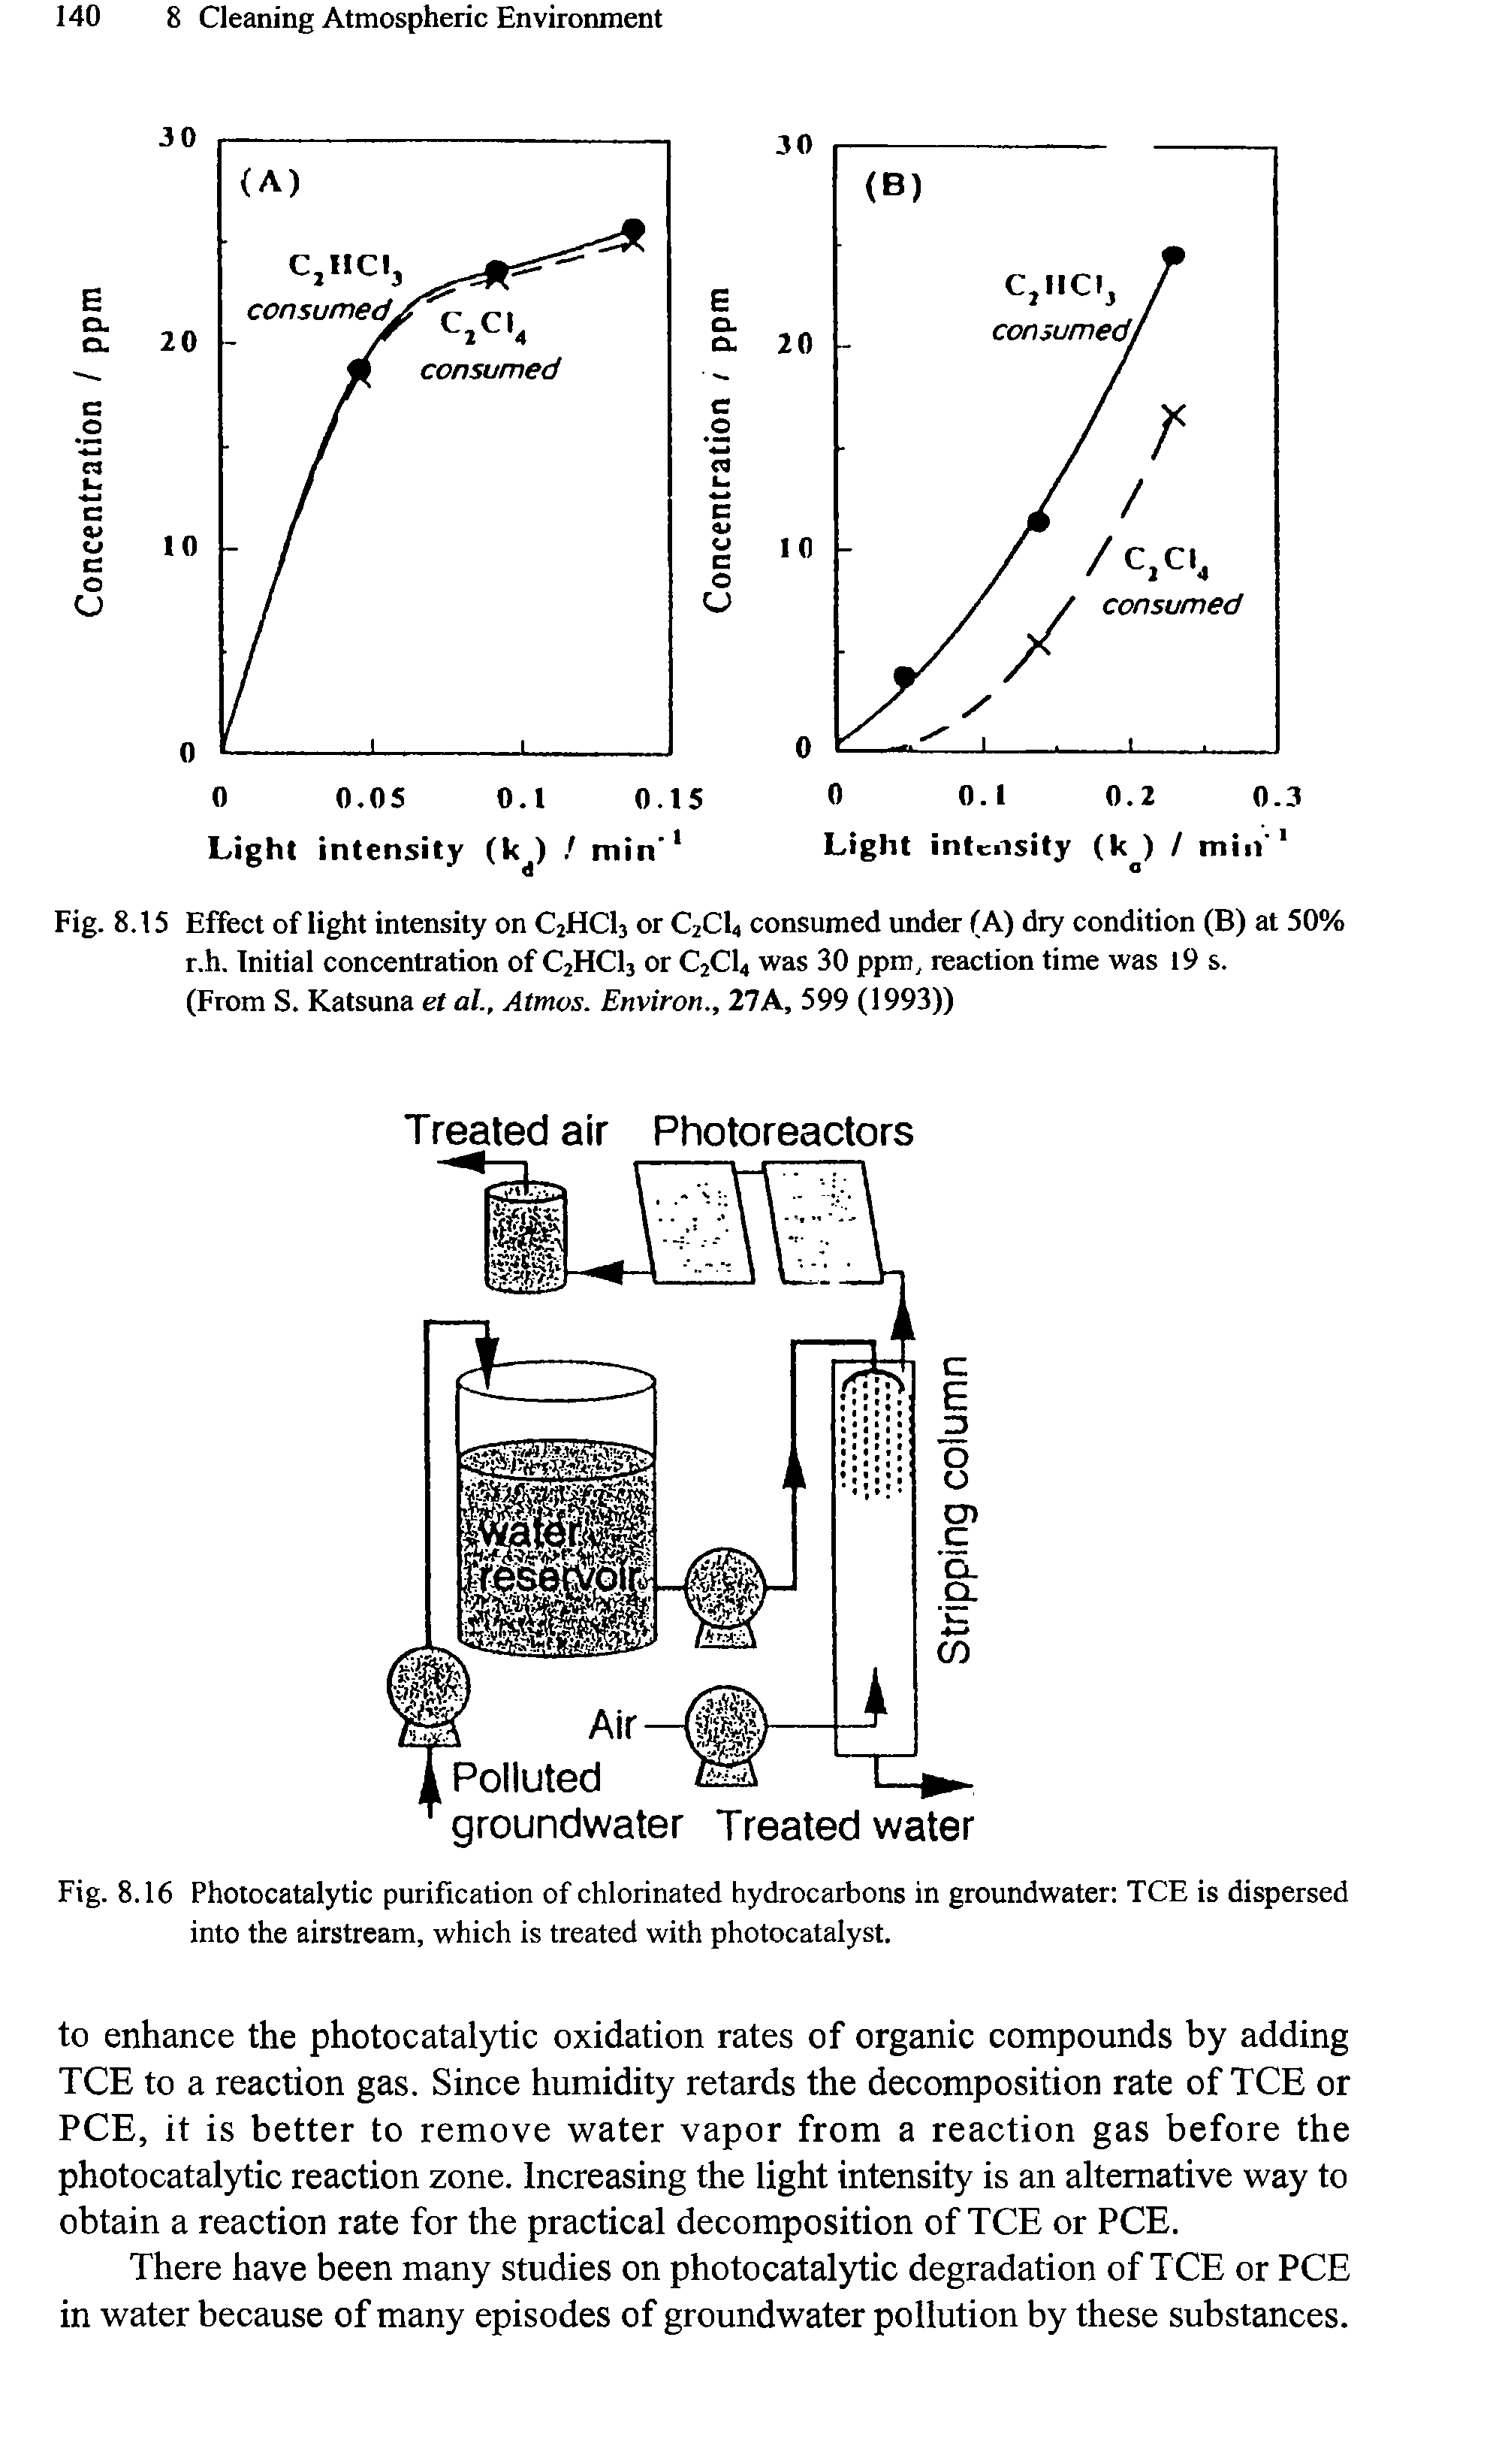 Fig. 8.15 Effect of light intensity on C2HC13 or C2C14 consumed under (A) dry condition (B) at 50% r.h. Initial concentration of C2HC13 or C2C14 was 30 ppm, reaction time was 19 s.